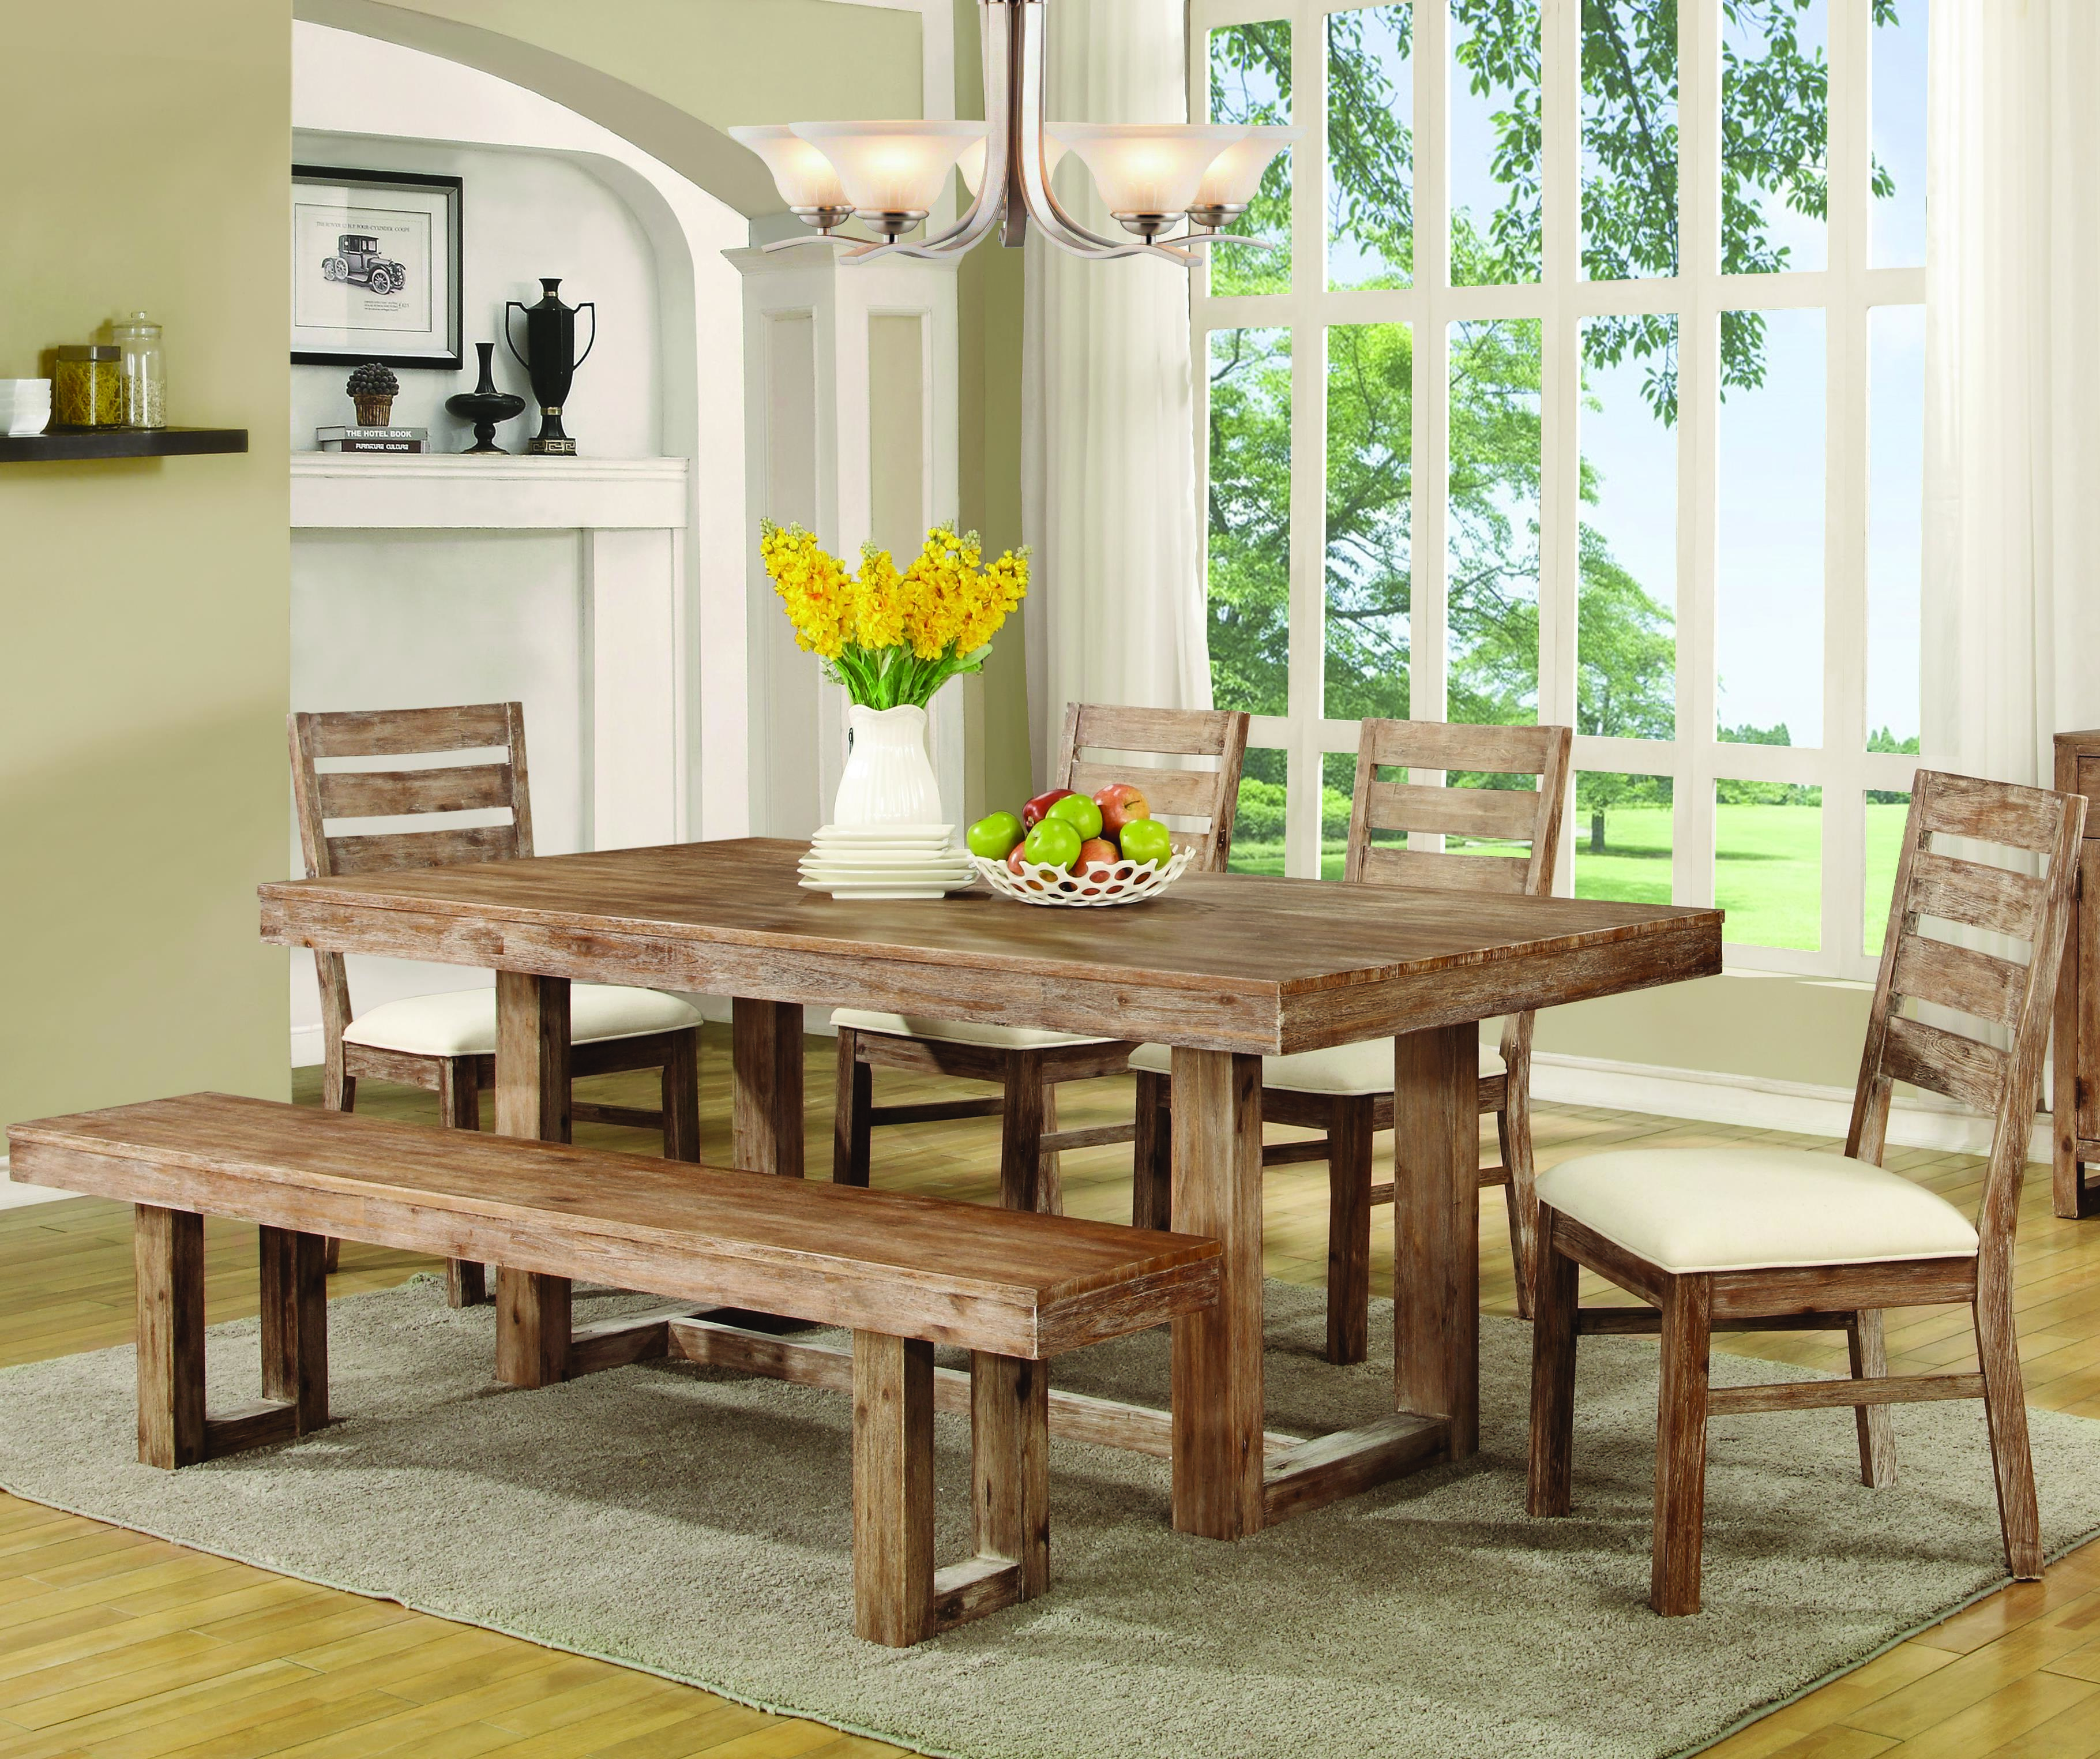 New Rustic Dining Room Sets with Simple Decor